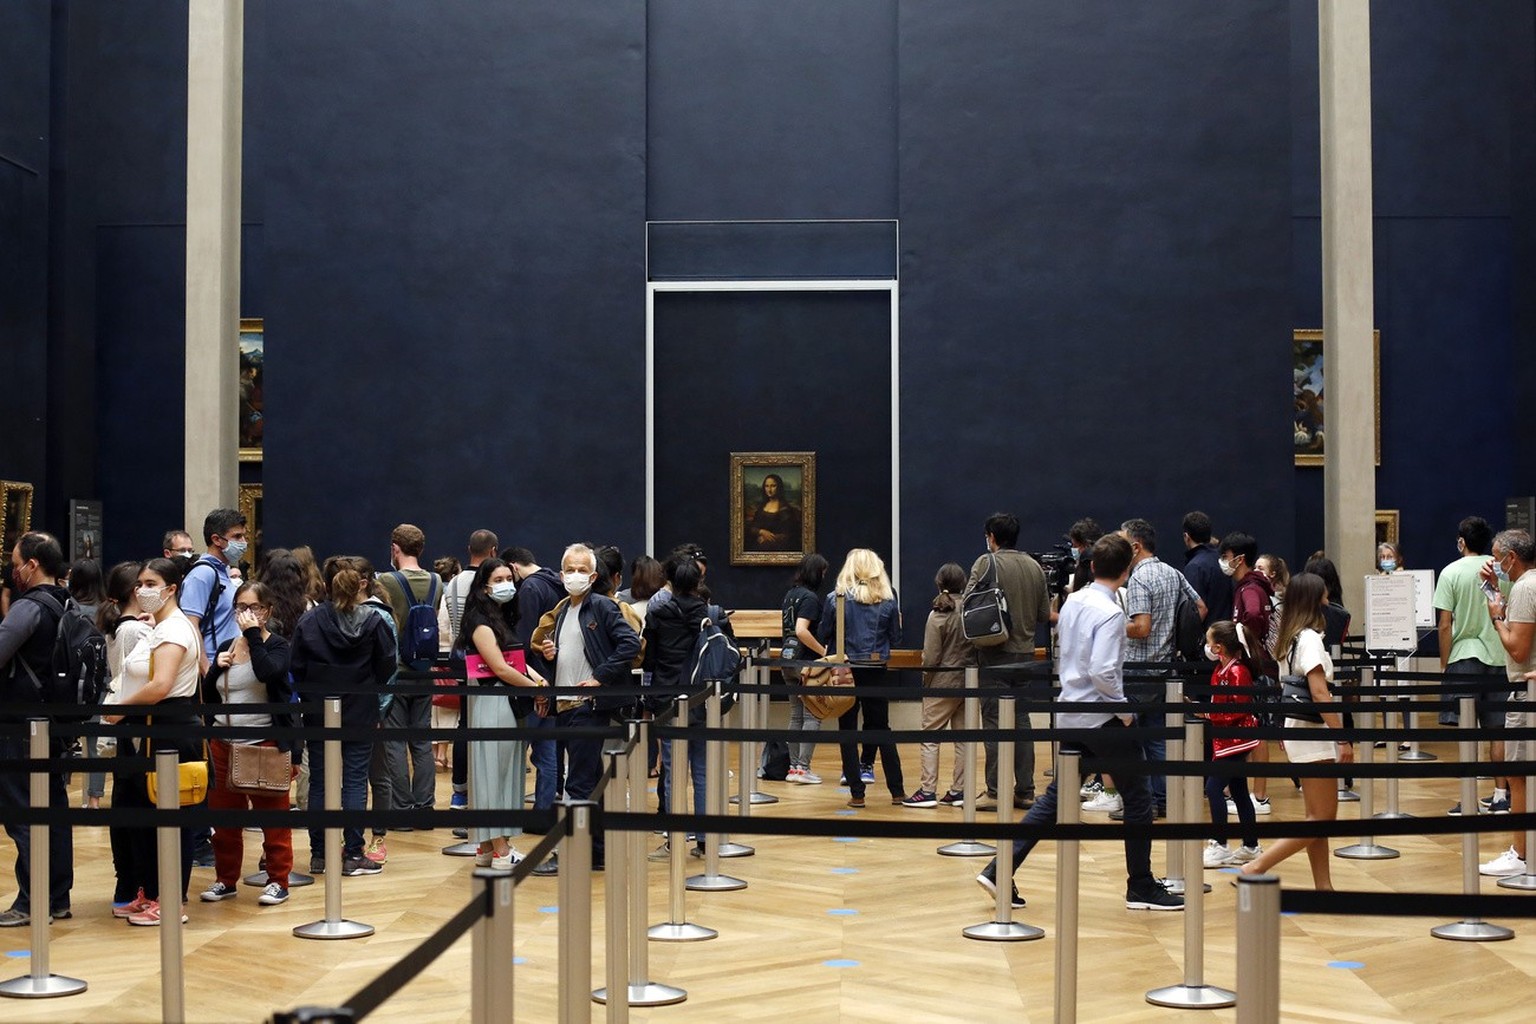 Visitors wait to see the Leonardo da Vinci&#039;s painting Mona Lisa, in Paris, Monday, July 6, 2020. The home of the world&#039;s most famous portrait, the Louvre Museum in Paris, reopened Monday aft ...